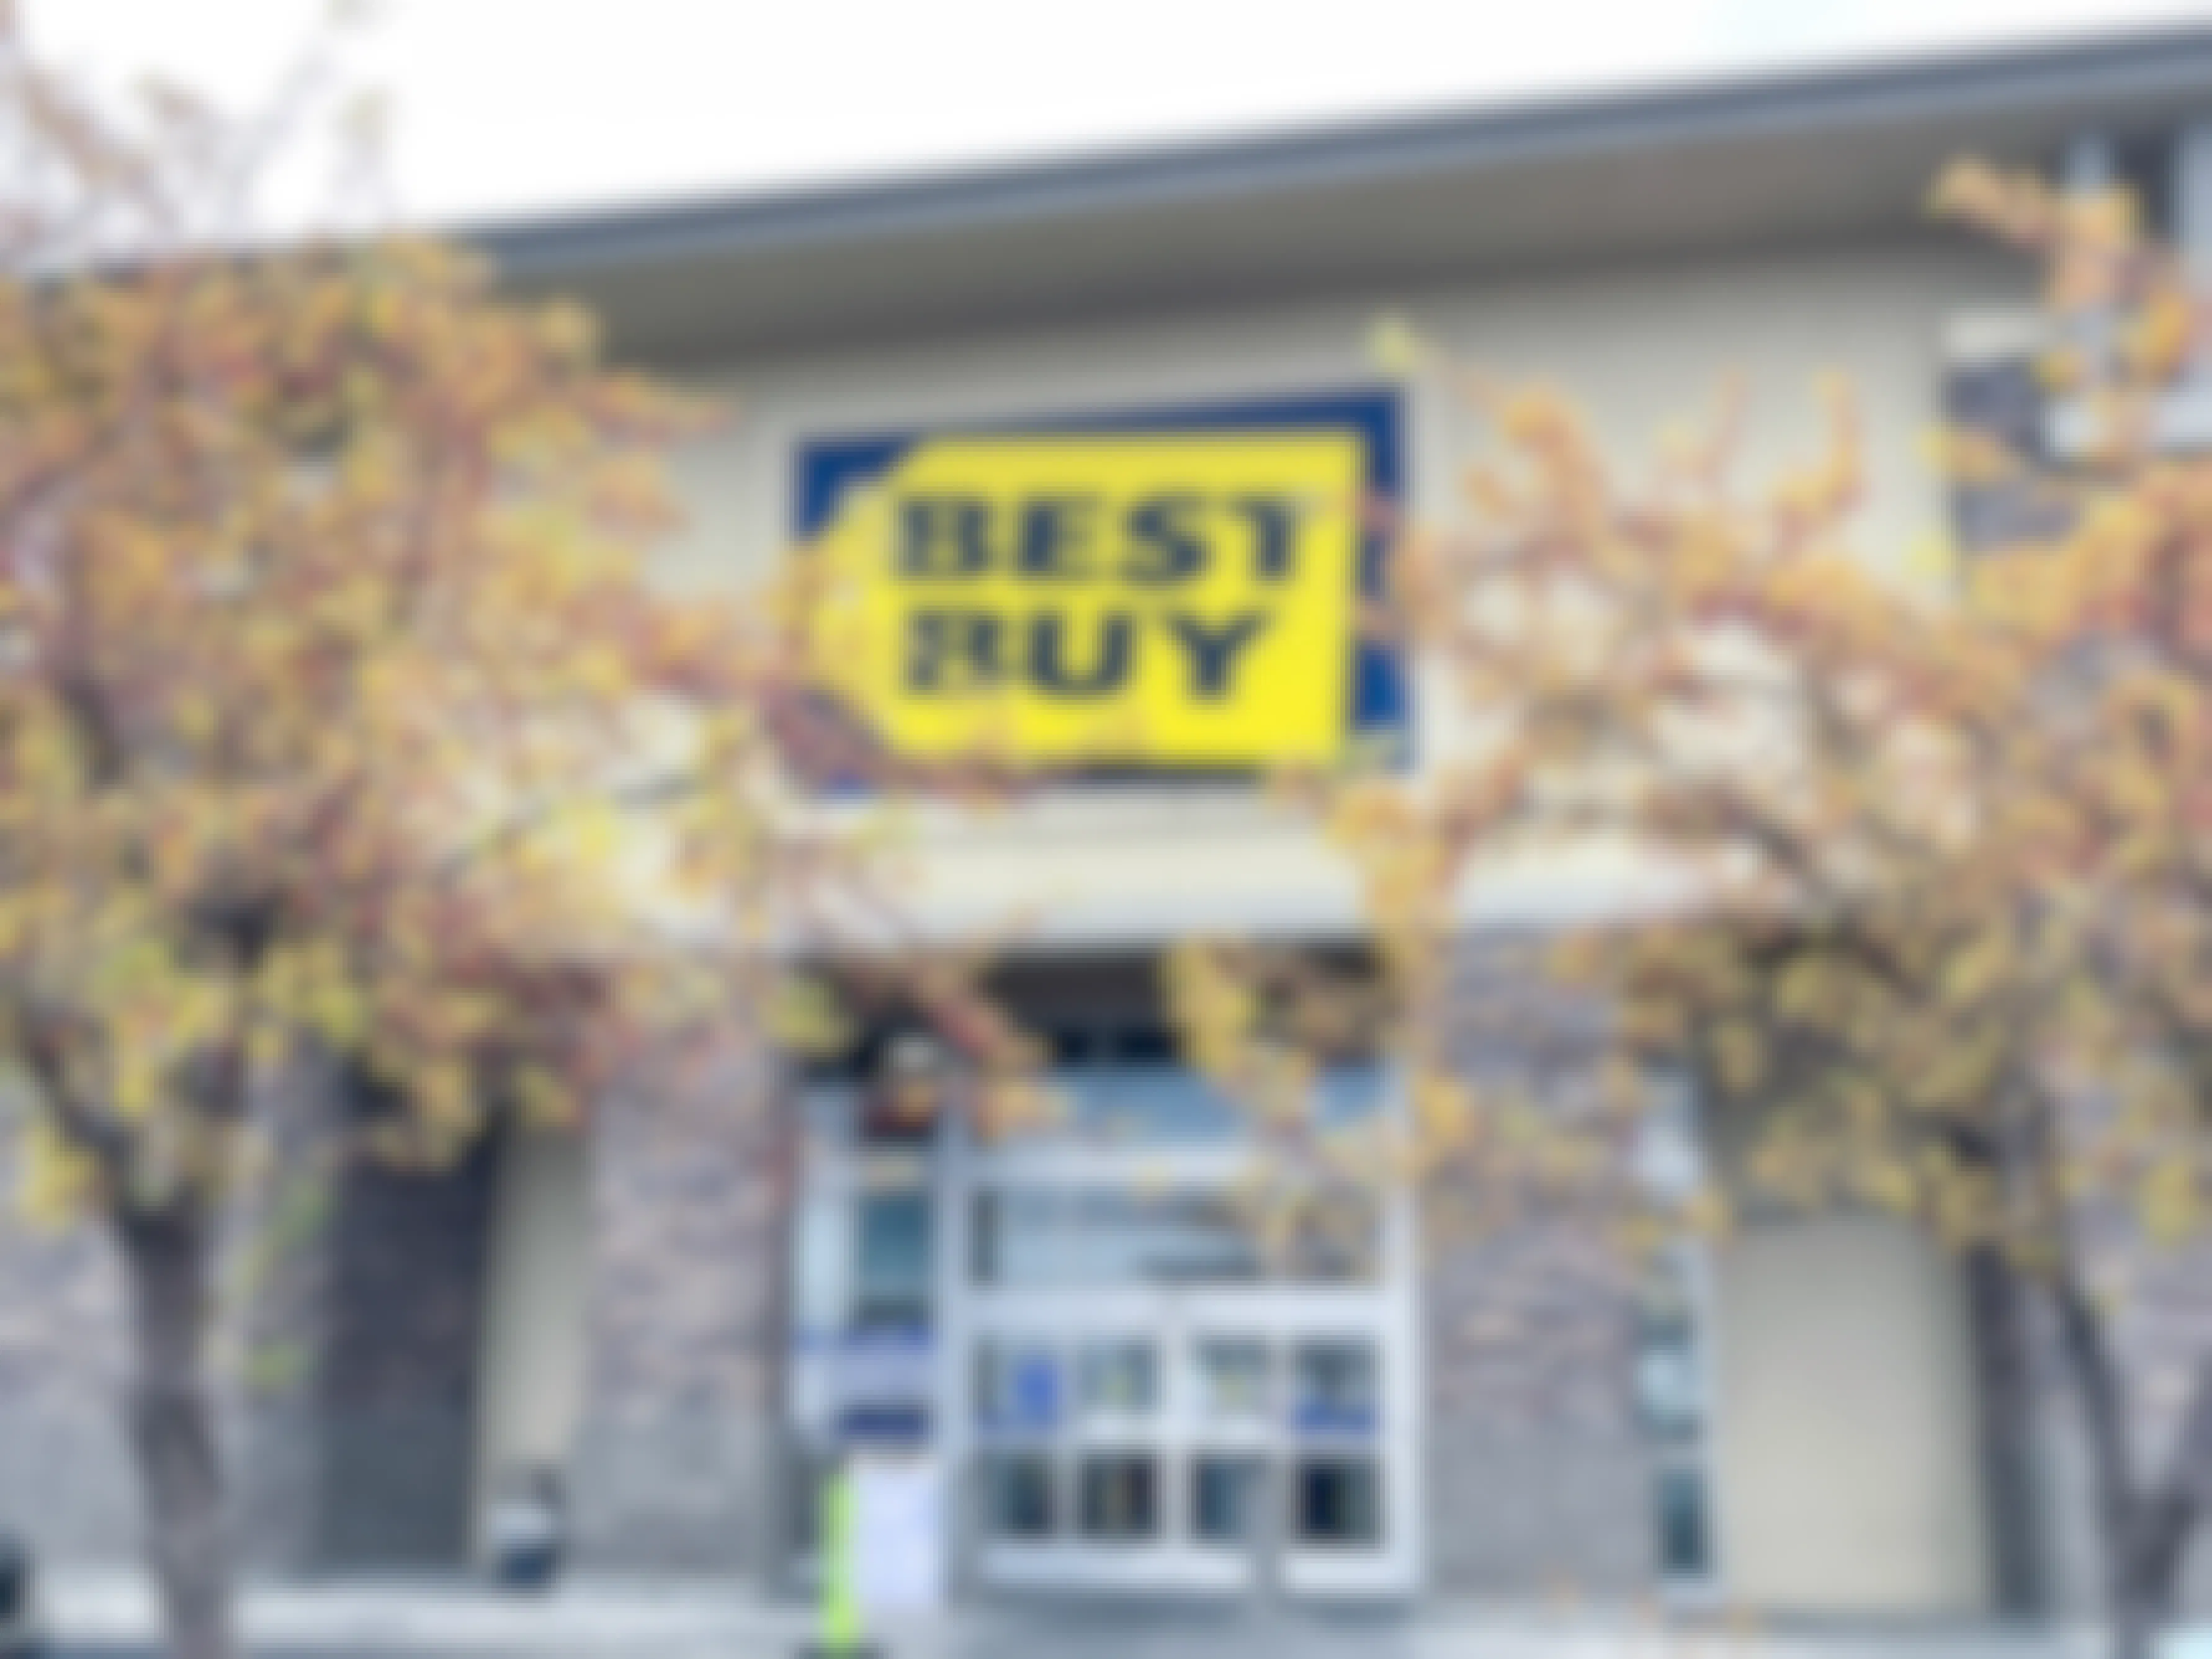 Does Best Buy Have a Military Discount or Not? Let's Settle the Score